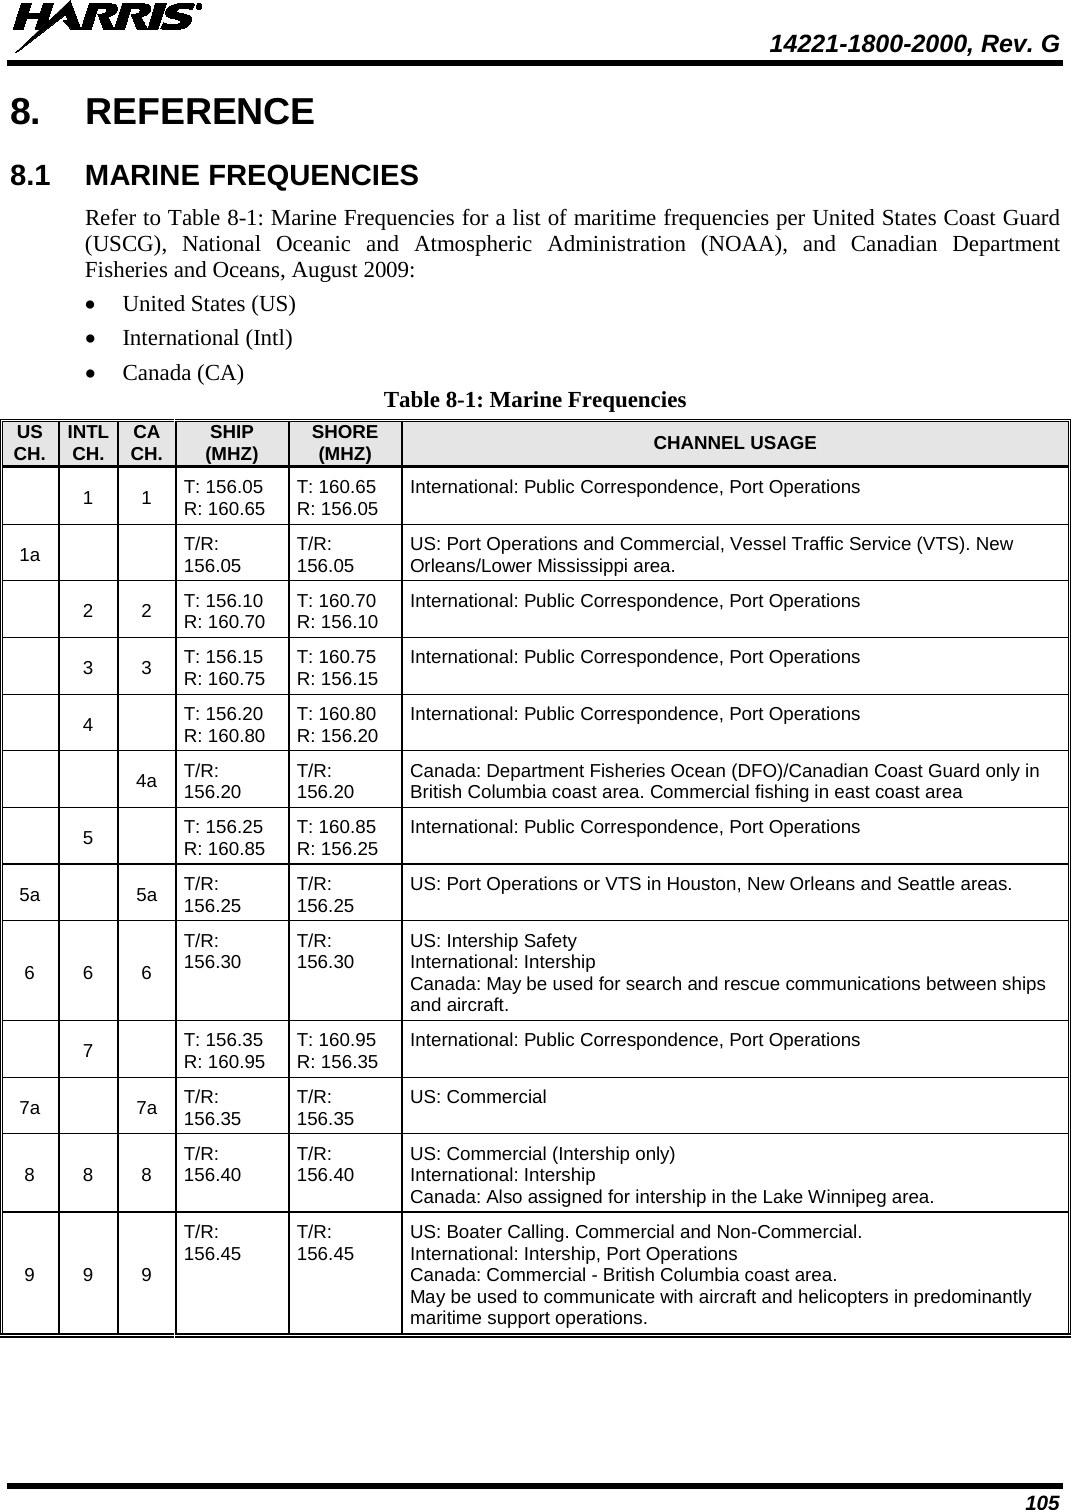  14221-1800-2000, Rev. G 105 8. REFERENCE 8.1 MARINE FREQUENCIES Refer to Table 8-1: Marine Frequencies for a list of maritime frequencies per United States Coast Guard (USCG), National Oceanic and Atmospheric Administration (NOAA), and Canadian Department Fisheries and Oceans, August 2009: • United States (US) • International (Intl) • Canada (CA)  Table 8-1: Marine Frequencies US CH. INTL CH. CA CH. SHIP (MHZ) SHORE (MHZ) CHANNEL USAGE   1  1 T: 156.05 R: 160.65 T: 160.65 R: 156.05 International: Public Correspondence, Port Operations 1a     T/R: 156.05 T/R: 156.05 US: Port Operations and Commercial, Vessel Traffic Service (VTS). New Orleans/Lower Mississippi area.    2  2 T: 156.10 R: 160.70 T: 160.70  R: 156.10 International: Public Correspondence, Port Operations   3  3 T: 156.15 R: 160.75 T: 160.75 R: 156.15 International: Public Correspondence, Port Operations   4   T: 156.20  R: 160.80 T: 160.80  R: 156.20 International: Public Correspondence, Port Operations     4a T/R: 156.20 T/R: 156.20 Canada: Department Fisheries Ocean (DFO)/Canadian Coast Guard only in British Columbia coast area. Commercial fishing in east coast area   5   T: 156.25  R: 160.85 T: 160.85  R: 156.25 International: Public Correspondence, Port Operations 5a    5a T/R: 156.25 T/R: 156.25 US: Port Operations or VTS in Houston, New Orleans and Seattle areas. 6  6  6 T/R: 156.30 T/R: 156.30 US: Intership Safety International: Intership Canada: May be used for search and rescue communications between ships and aircraft.   7   T: 156.35  R: 160.95 T: 160.95  R: 156.35 International: Public Correspondence, Port Operations 7a    7a T/R: 156.35 T/R: 156.35 US: Commercial 8  8  8 T/R: 156.40 T/R: 156.40 US: Commercial (Intership only) International: Intership Canada: Also assigned for intership in the Lake Winnipeg area. 9  9  9 T/R: 156.45 T/R: 156.45 US: Boater Calling. Commercial and Non-Commercial. International: Intership, Port Operations Canada: Commercial - British Columbia coast area. May be used to communicate with aircraft and helicopters in predominantly maritime support operations. 